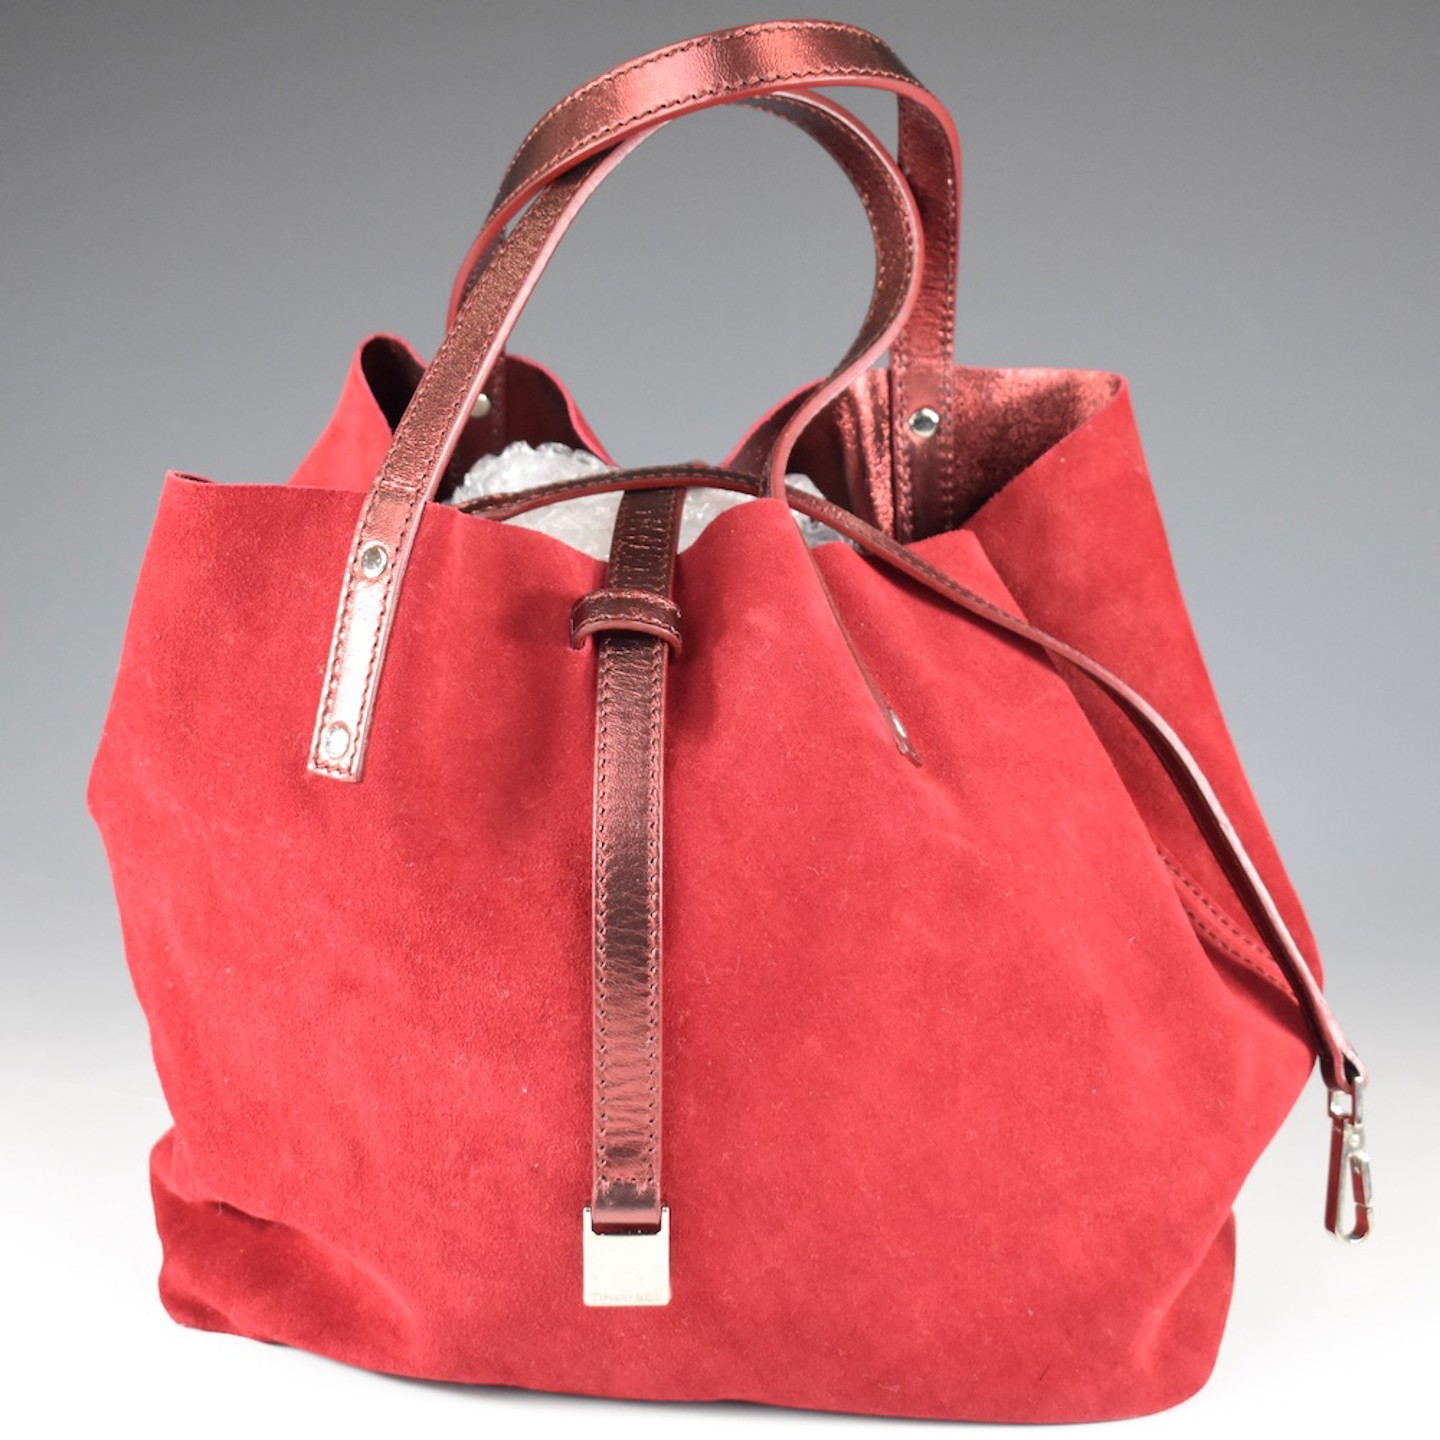 Tiffany & Co Suede And Red Metallic Leather Reversible Tote Bag With Integral Lanyard And Matching Wallet, Sold For Ś500